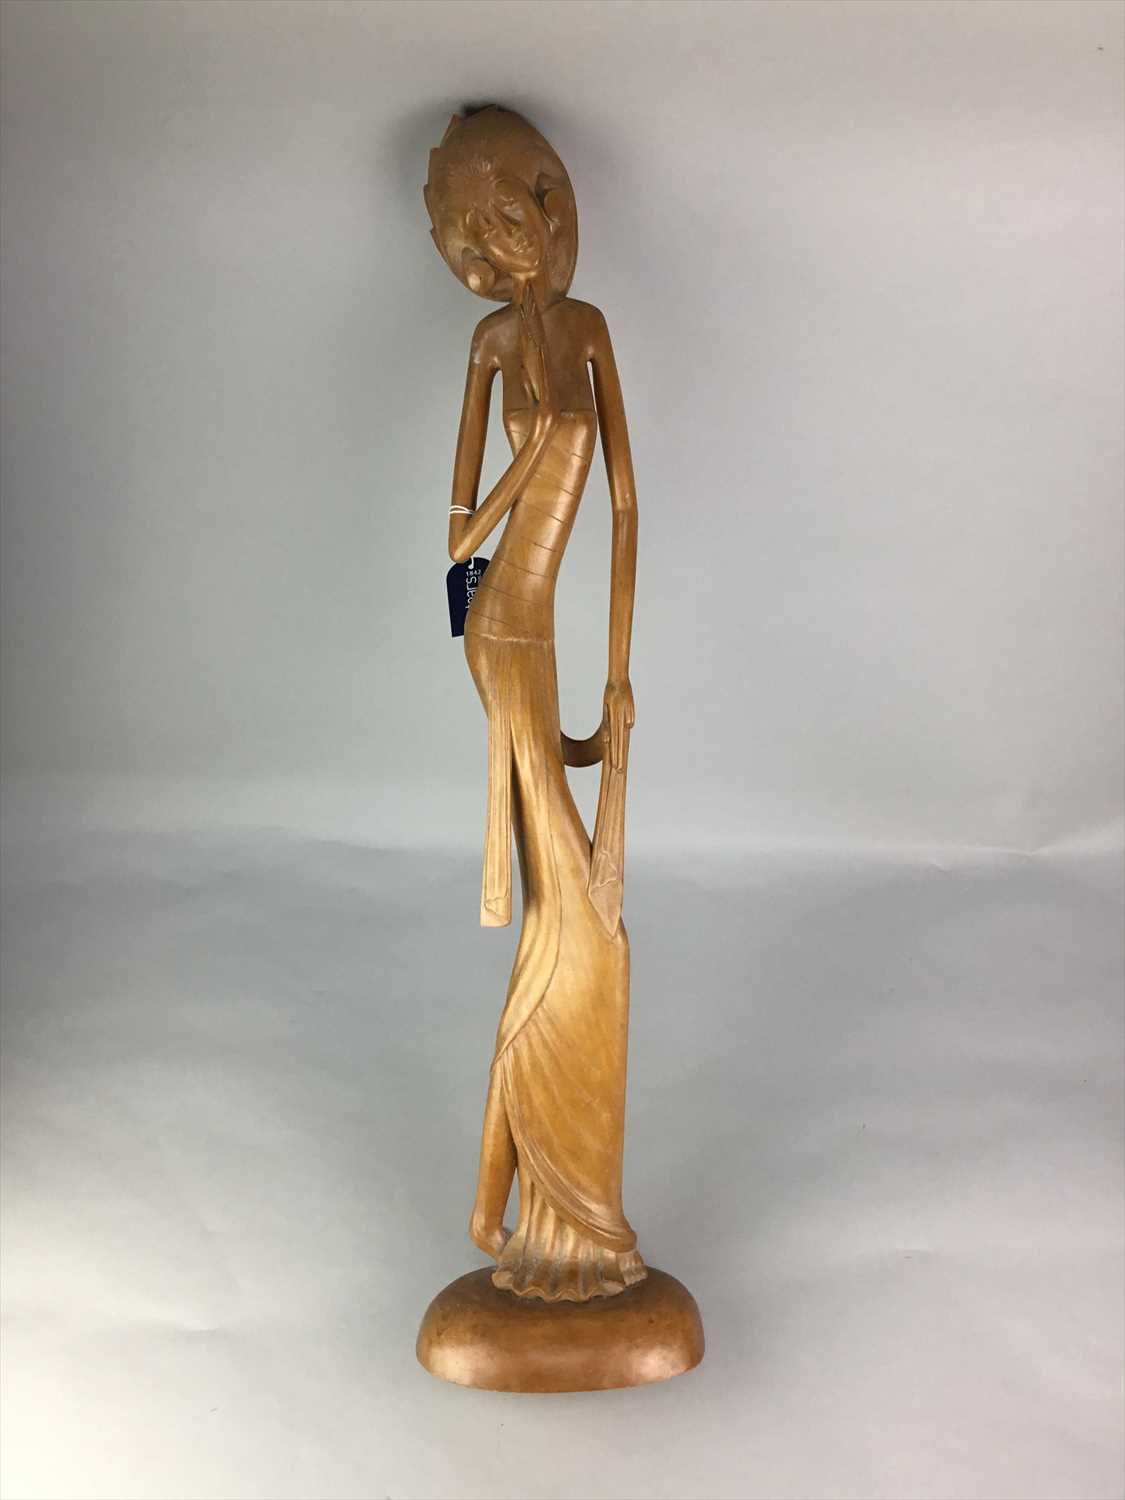 Lot 116 - A CARVED EASTERN FIGURE OF A LADY ALONG WITH OTHER WOOD AND BRASS ITEMS